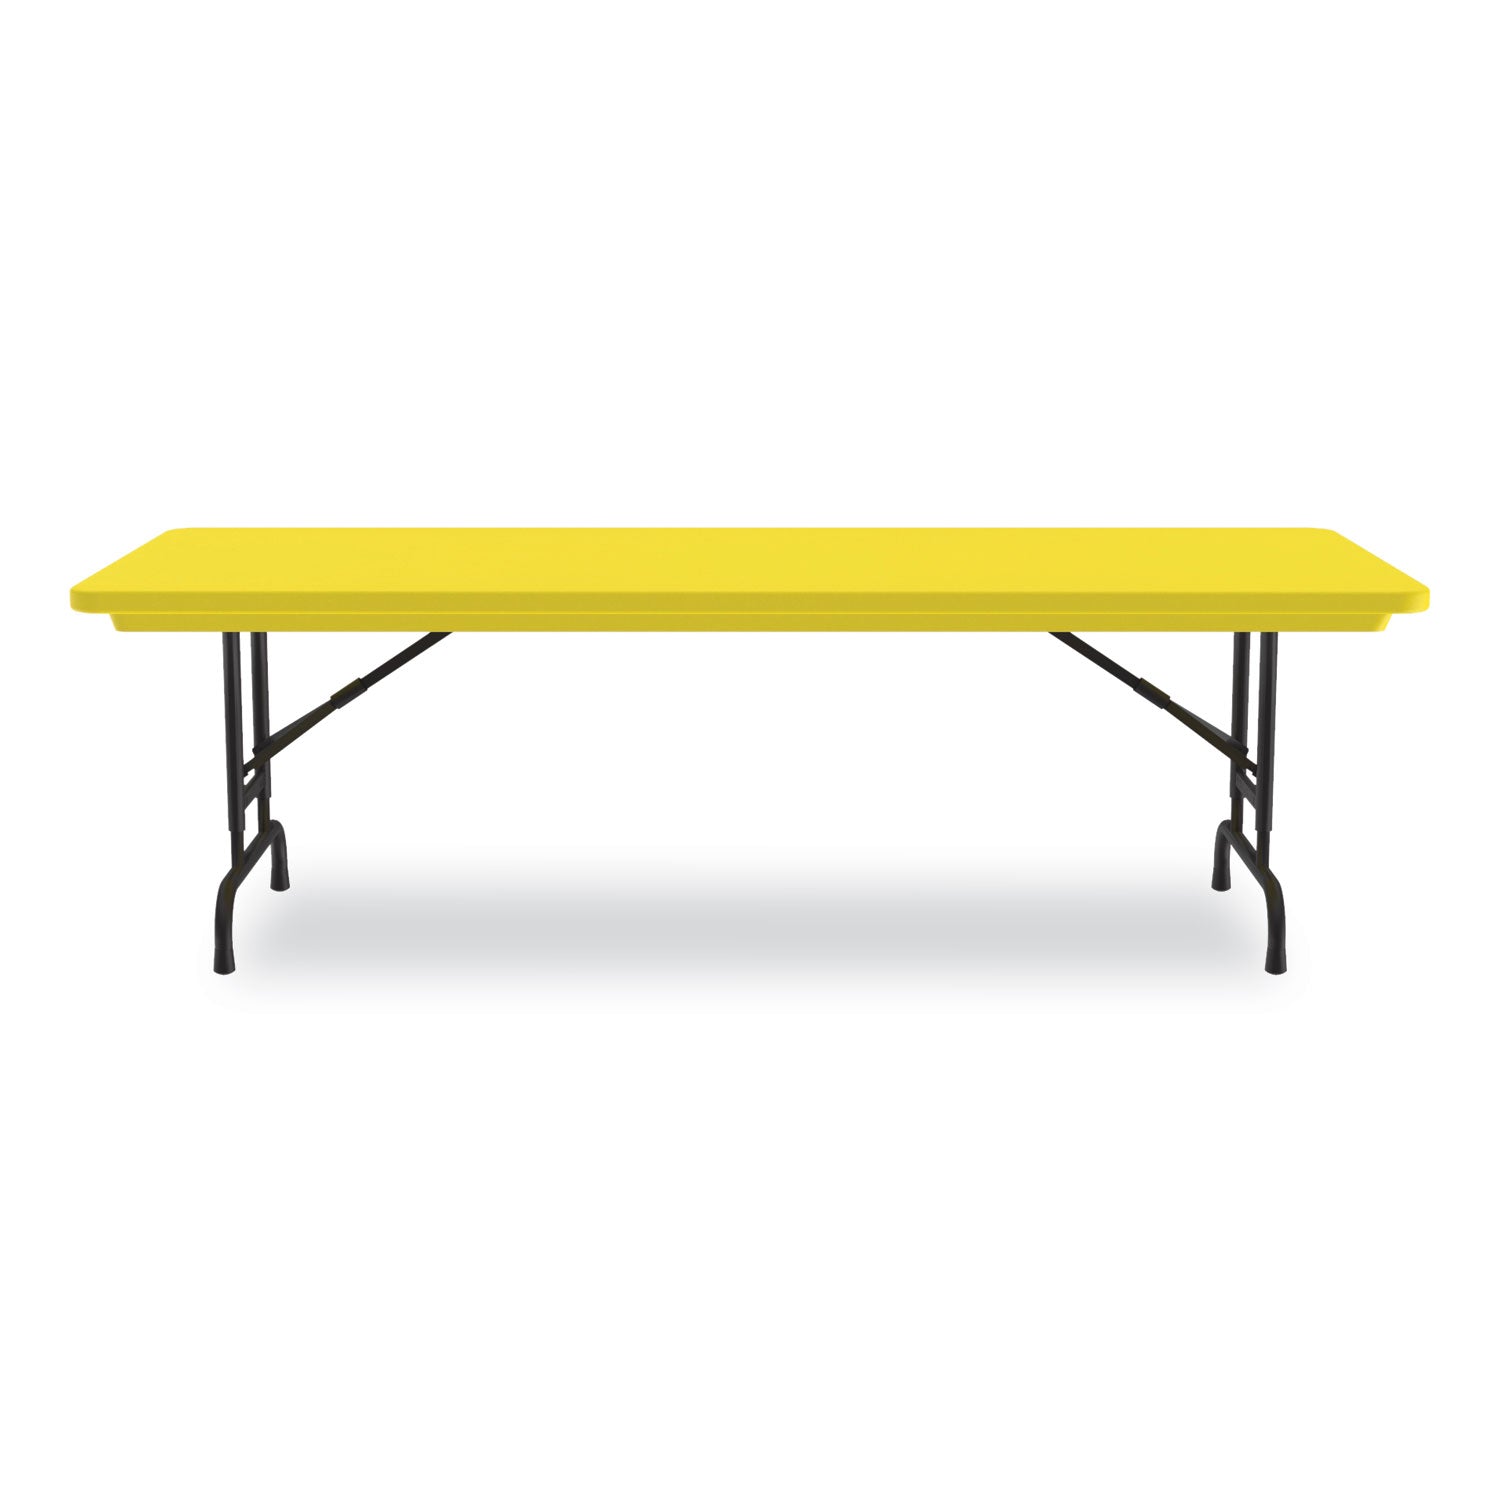 adjustable-folding-tables-rectangular-60-x-30-x-22-to-32-yellow-top-black-legs-4-pallet-ships-in-4-6-business-days_crlra3060284p - 5